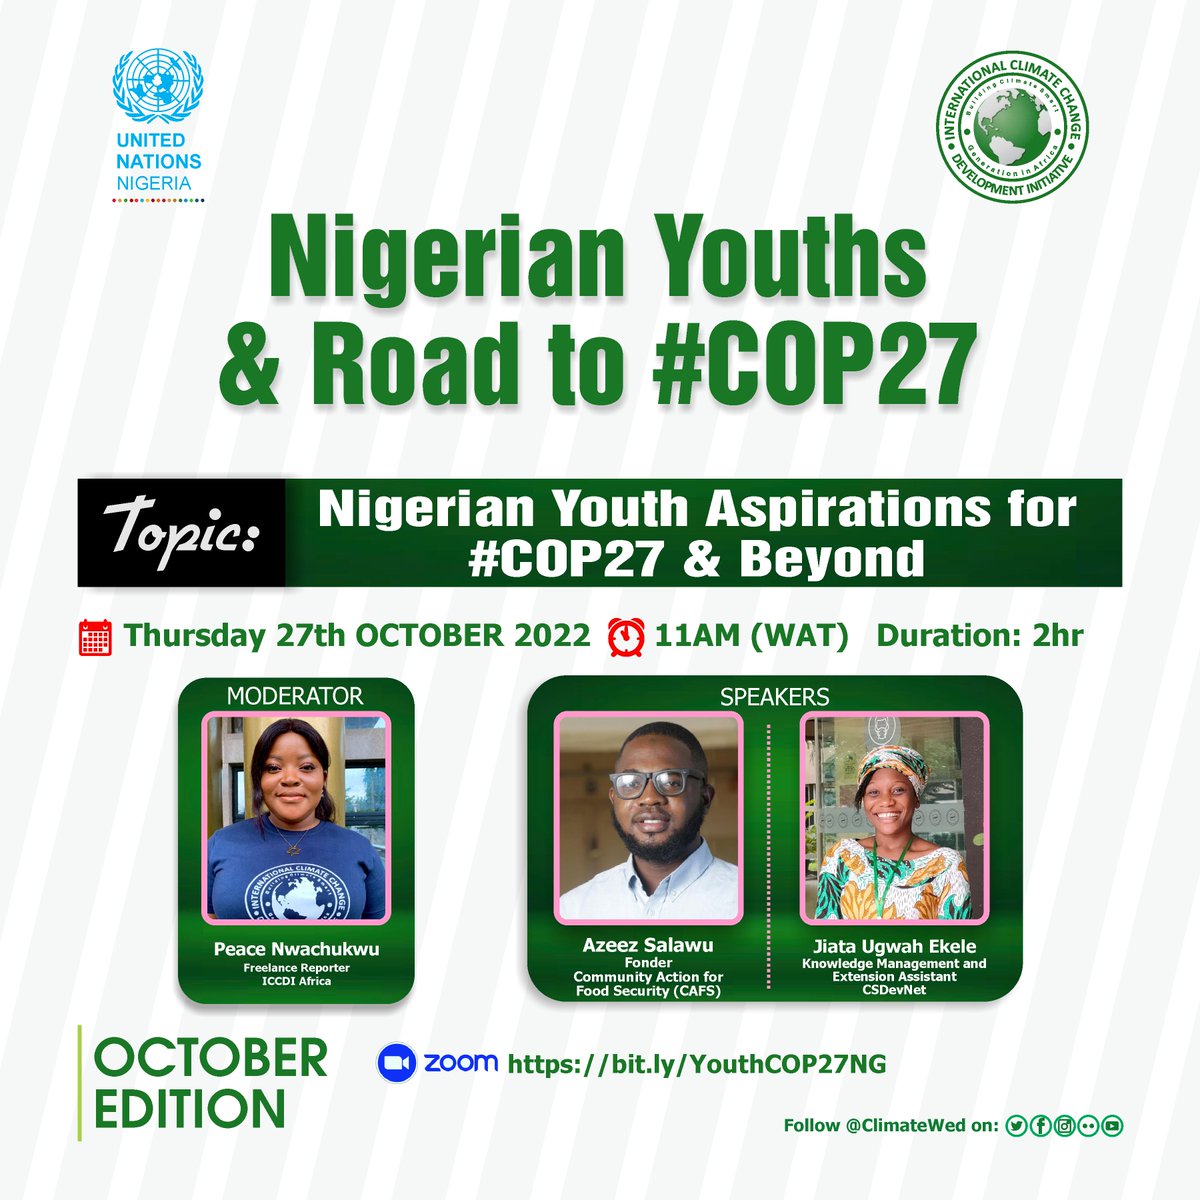 In collaborating with @UN_Nigeria we present our October edition of 'Nigerian Youths & Road to #COP27 conversation. This month we will be discussing “Nigerian Youth Aspirations for #COP27 & Beyond” at 11 AM WAT Register➡️ bit.ly/YouthCOP27NG @COP27P @IYCM @AYICC